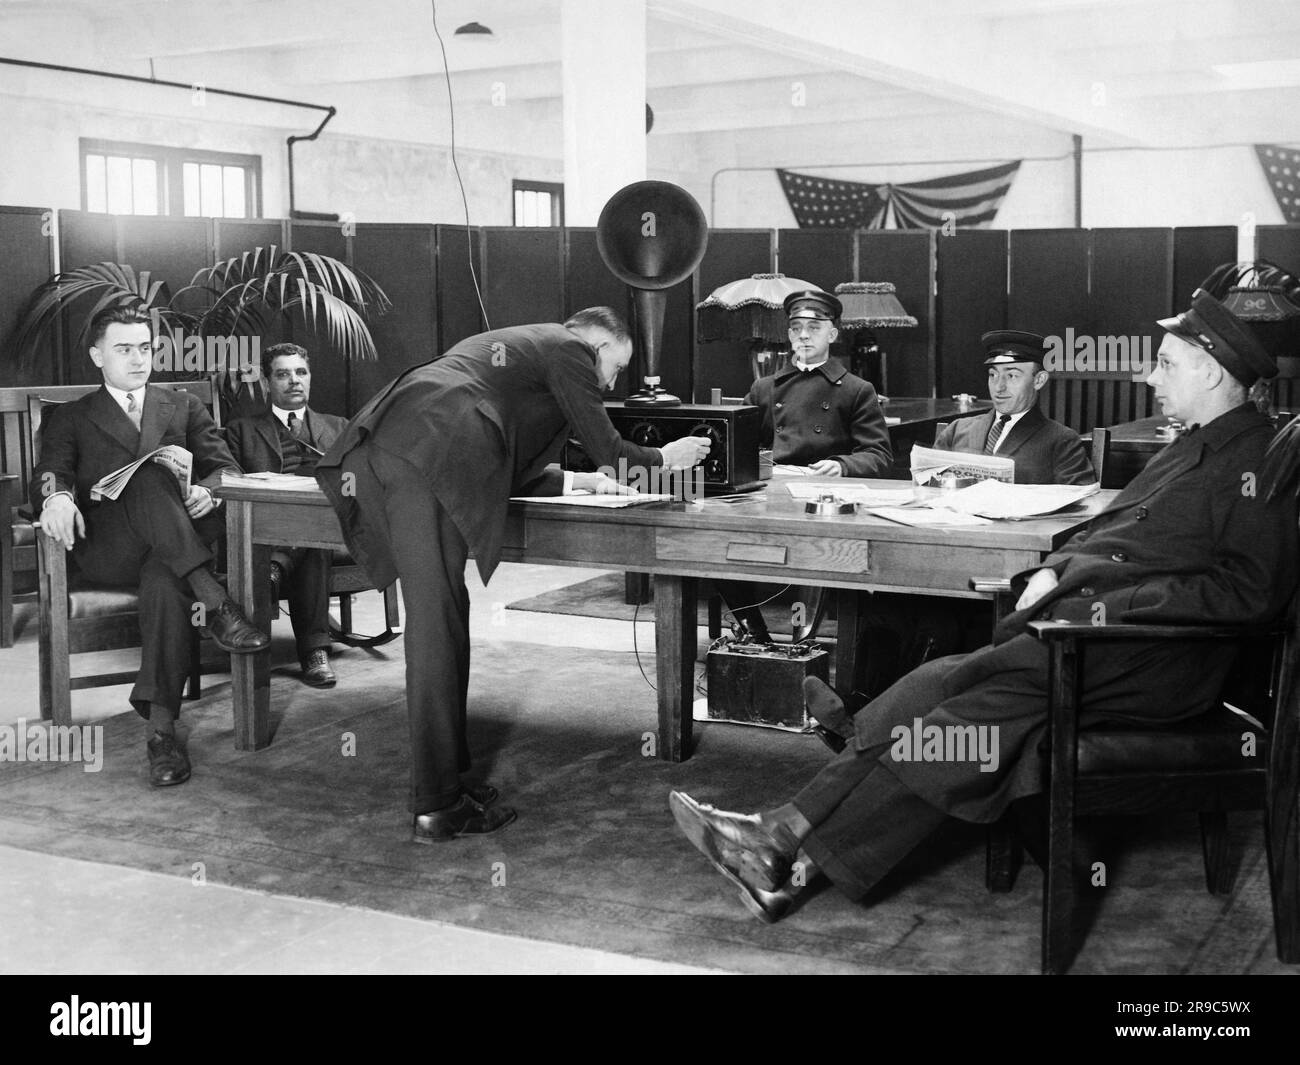 New York, New York:  December 17, 1924 Chauffeurs relax and listen to the radio in a 'rest room' while their employers shop. The service was set up by the Franklin Simon Department store, and the cars are parked in a garage to alleviate traffic in front of the store on Fifth Avenue. Stock Photo